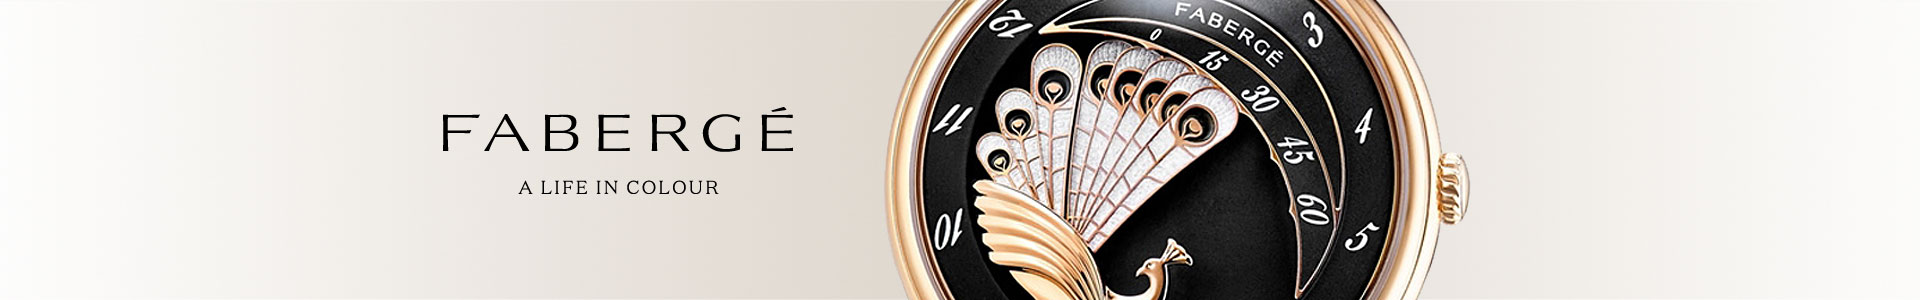 Faberge Watches